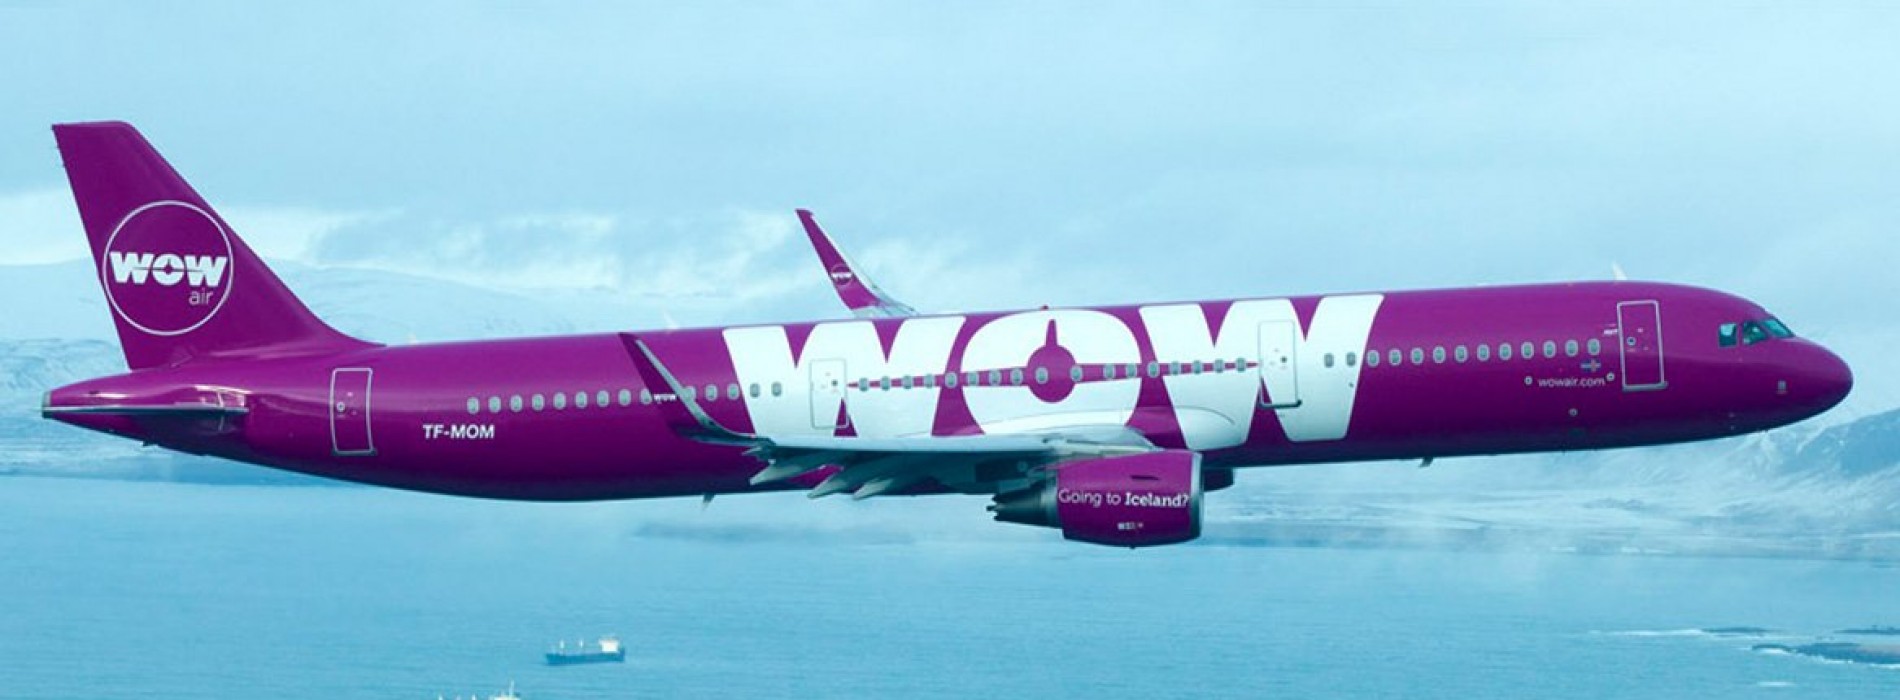 WOW air to start low-cost flights linking India, Europe, North America